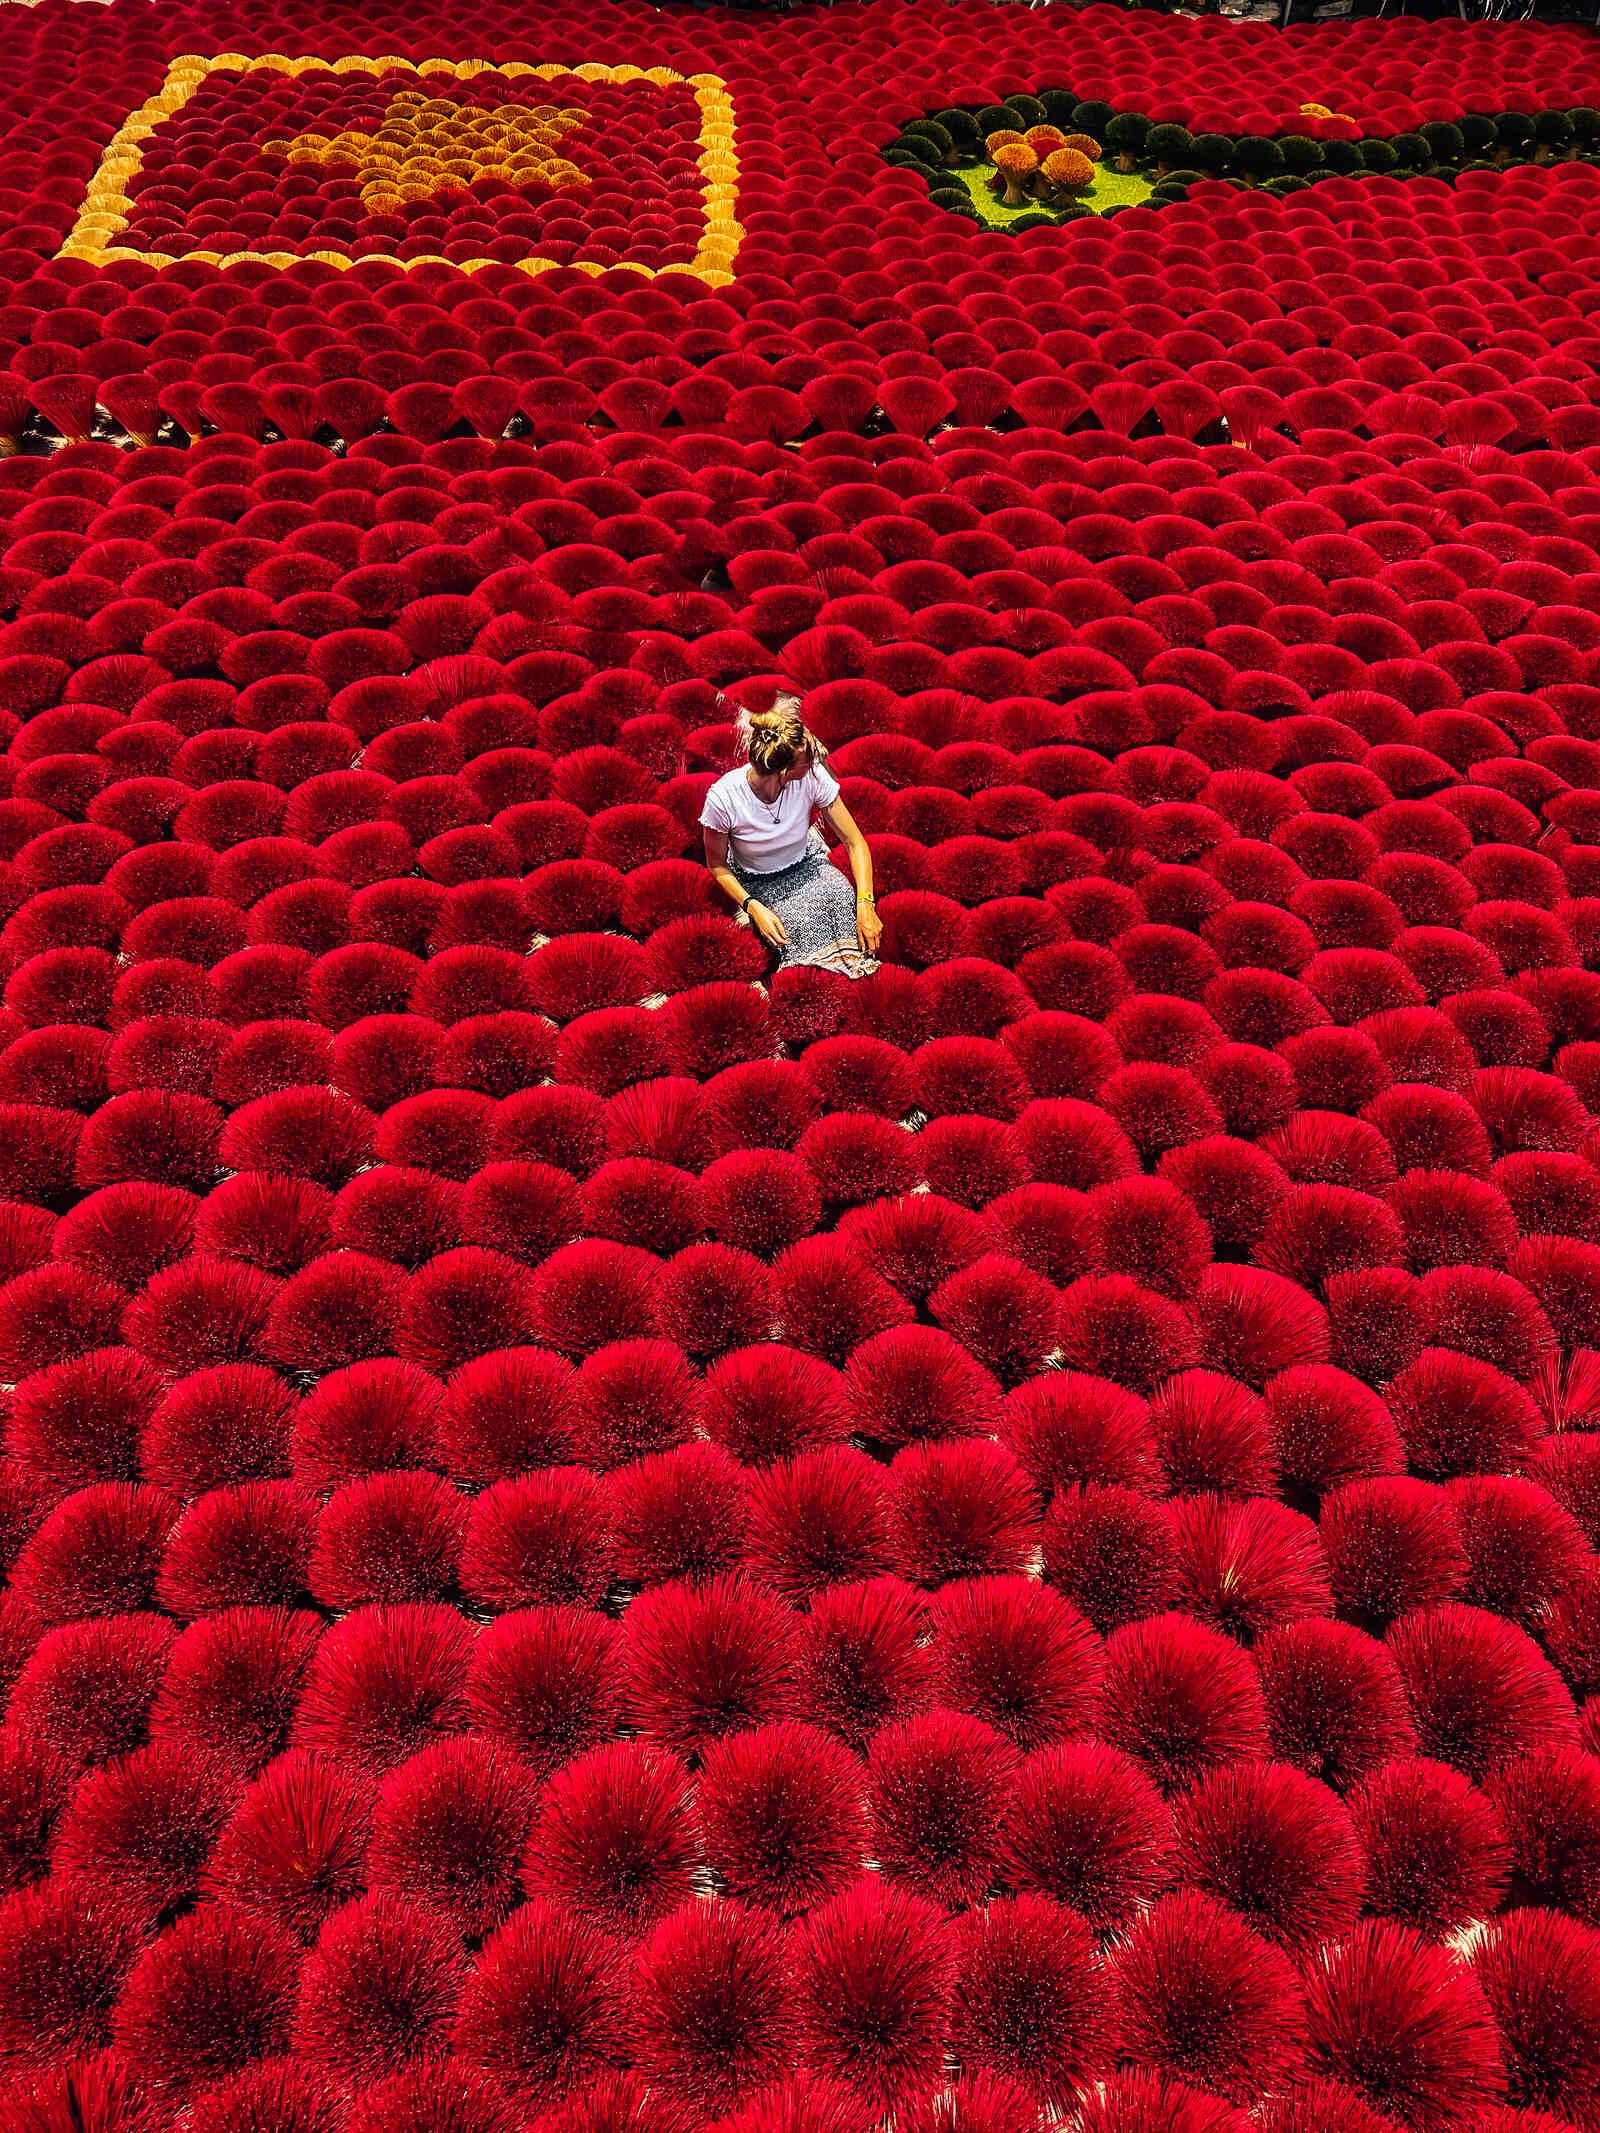 Helena in a cone hat sitting in the middle of a sea of red bundles on incense